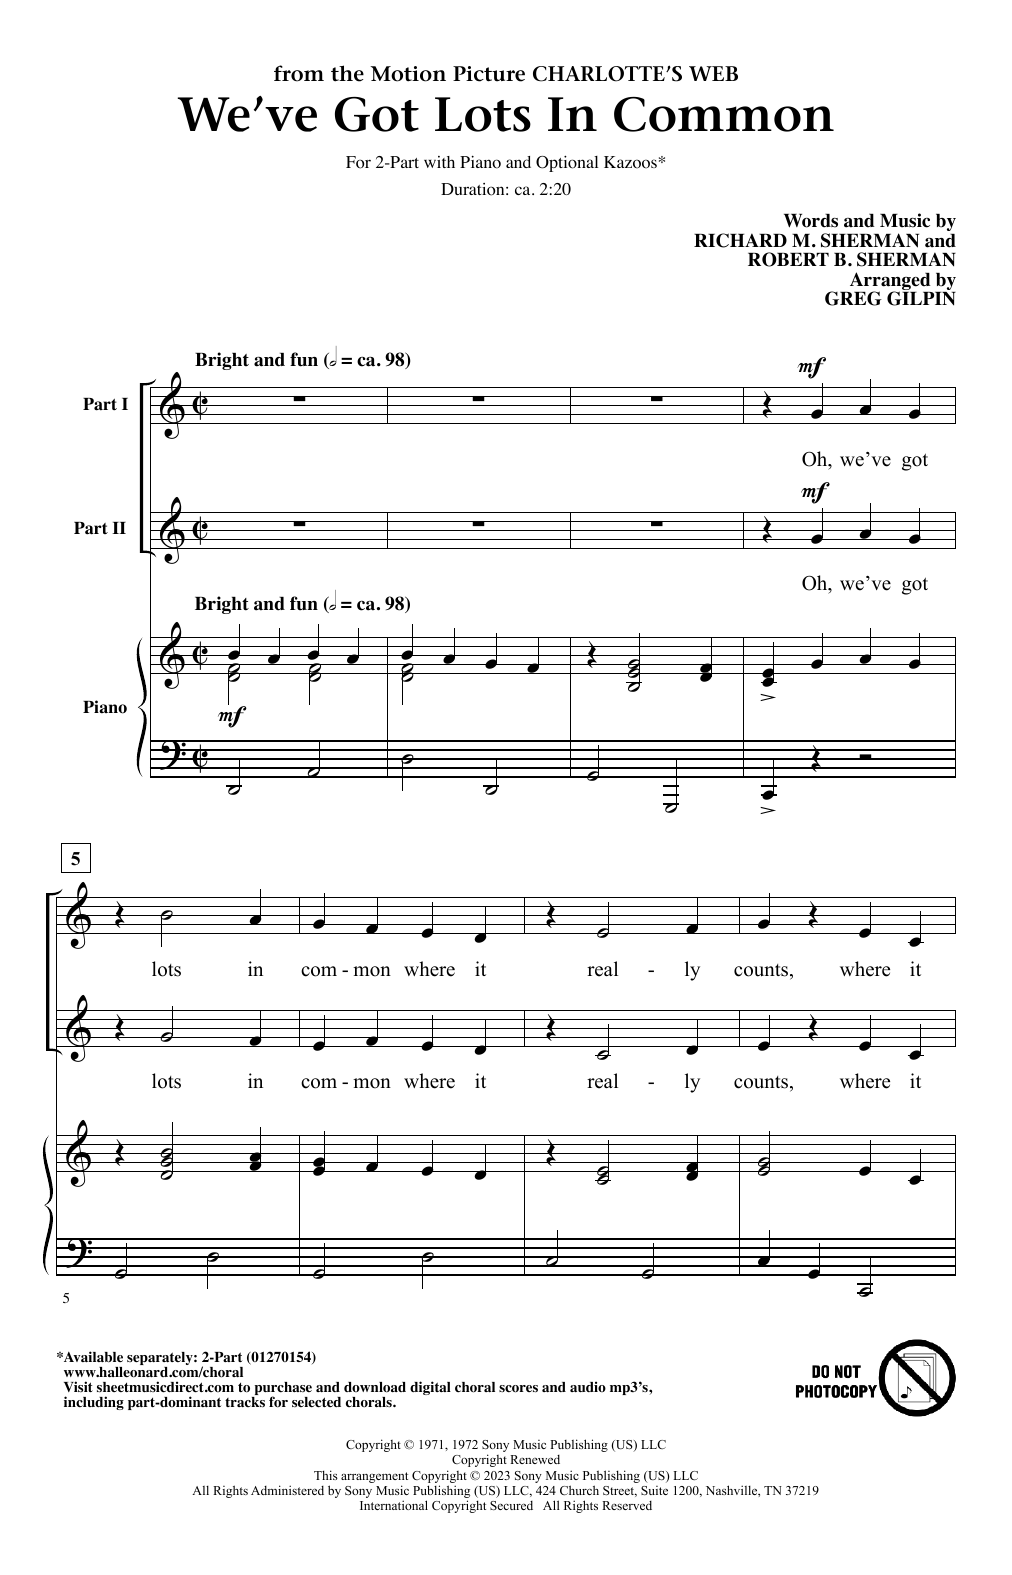 Sherman Brothers We've Got Lots In Common (from Charlotte's Web) (arr. Greg Gilpin) sheet music notes printable PDF score